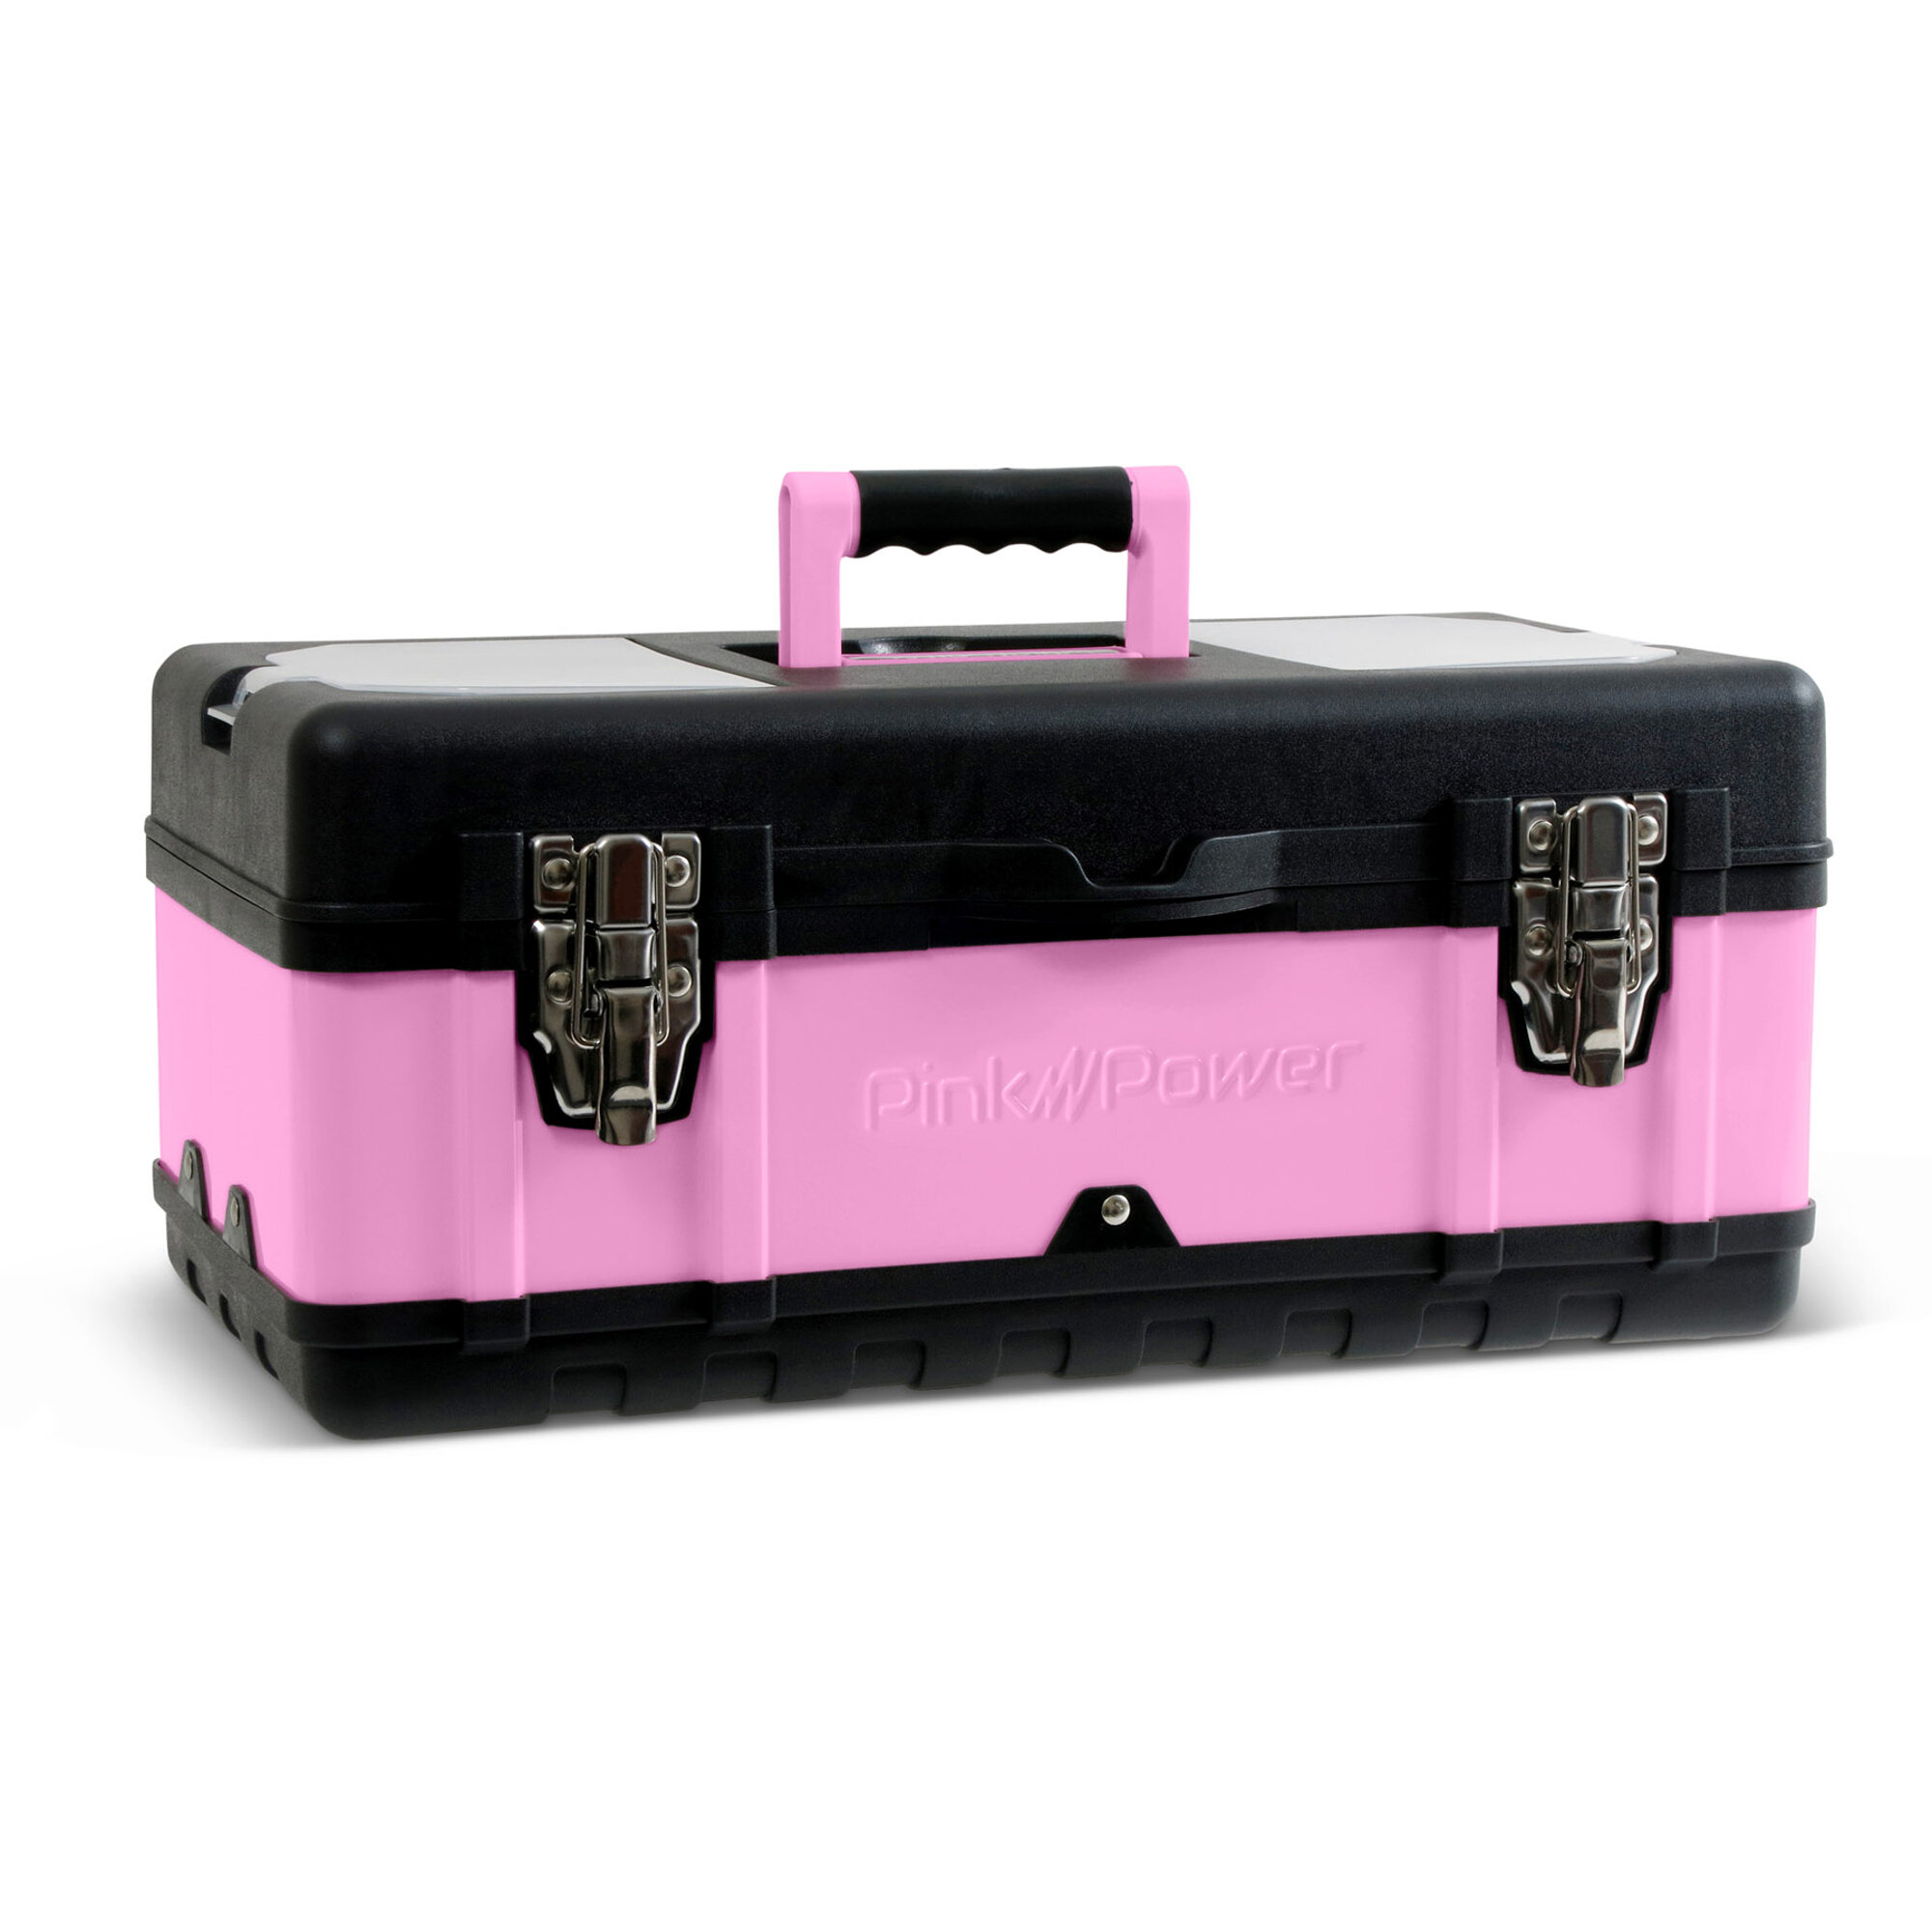 Pink Power 18 Aluminum Tool Box For Tool Or Craft Storage - Portable Tool  Case With Locking Lid And Extra Storage Compartments